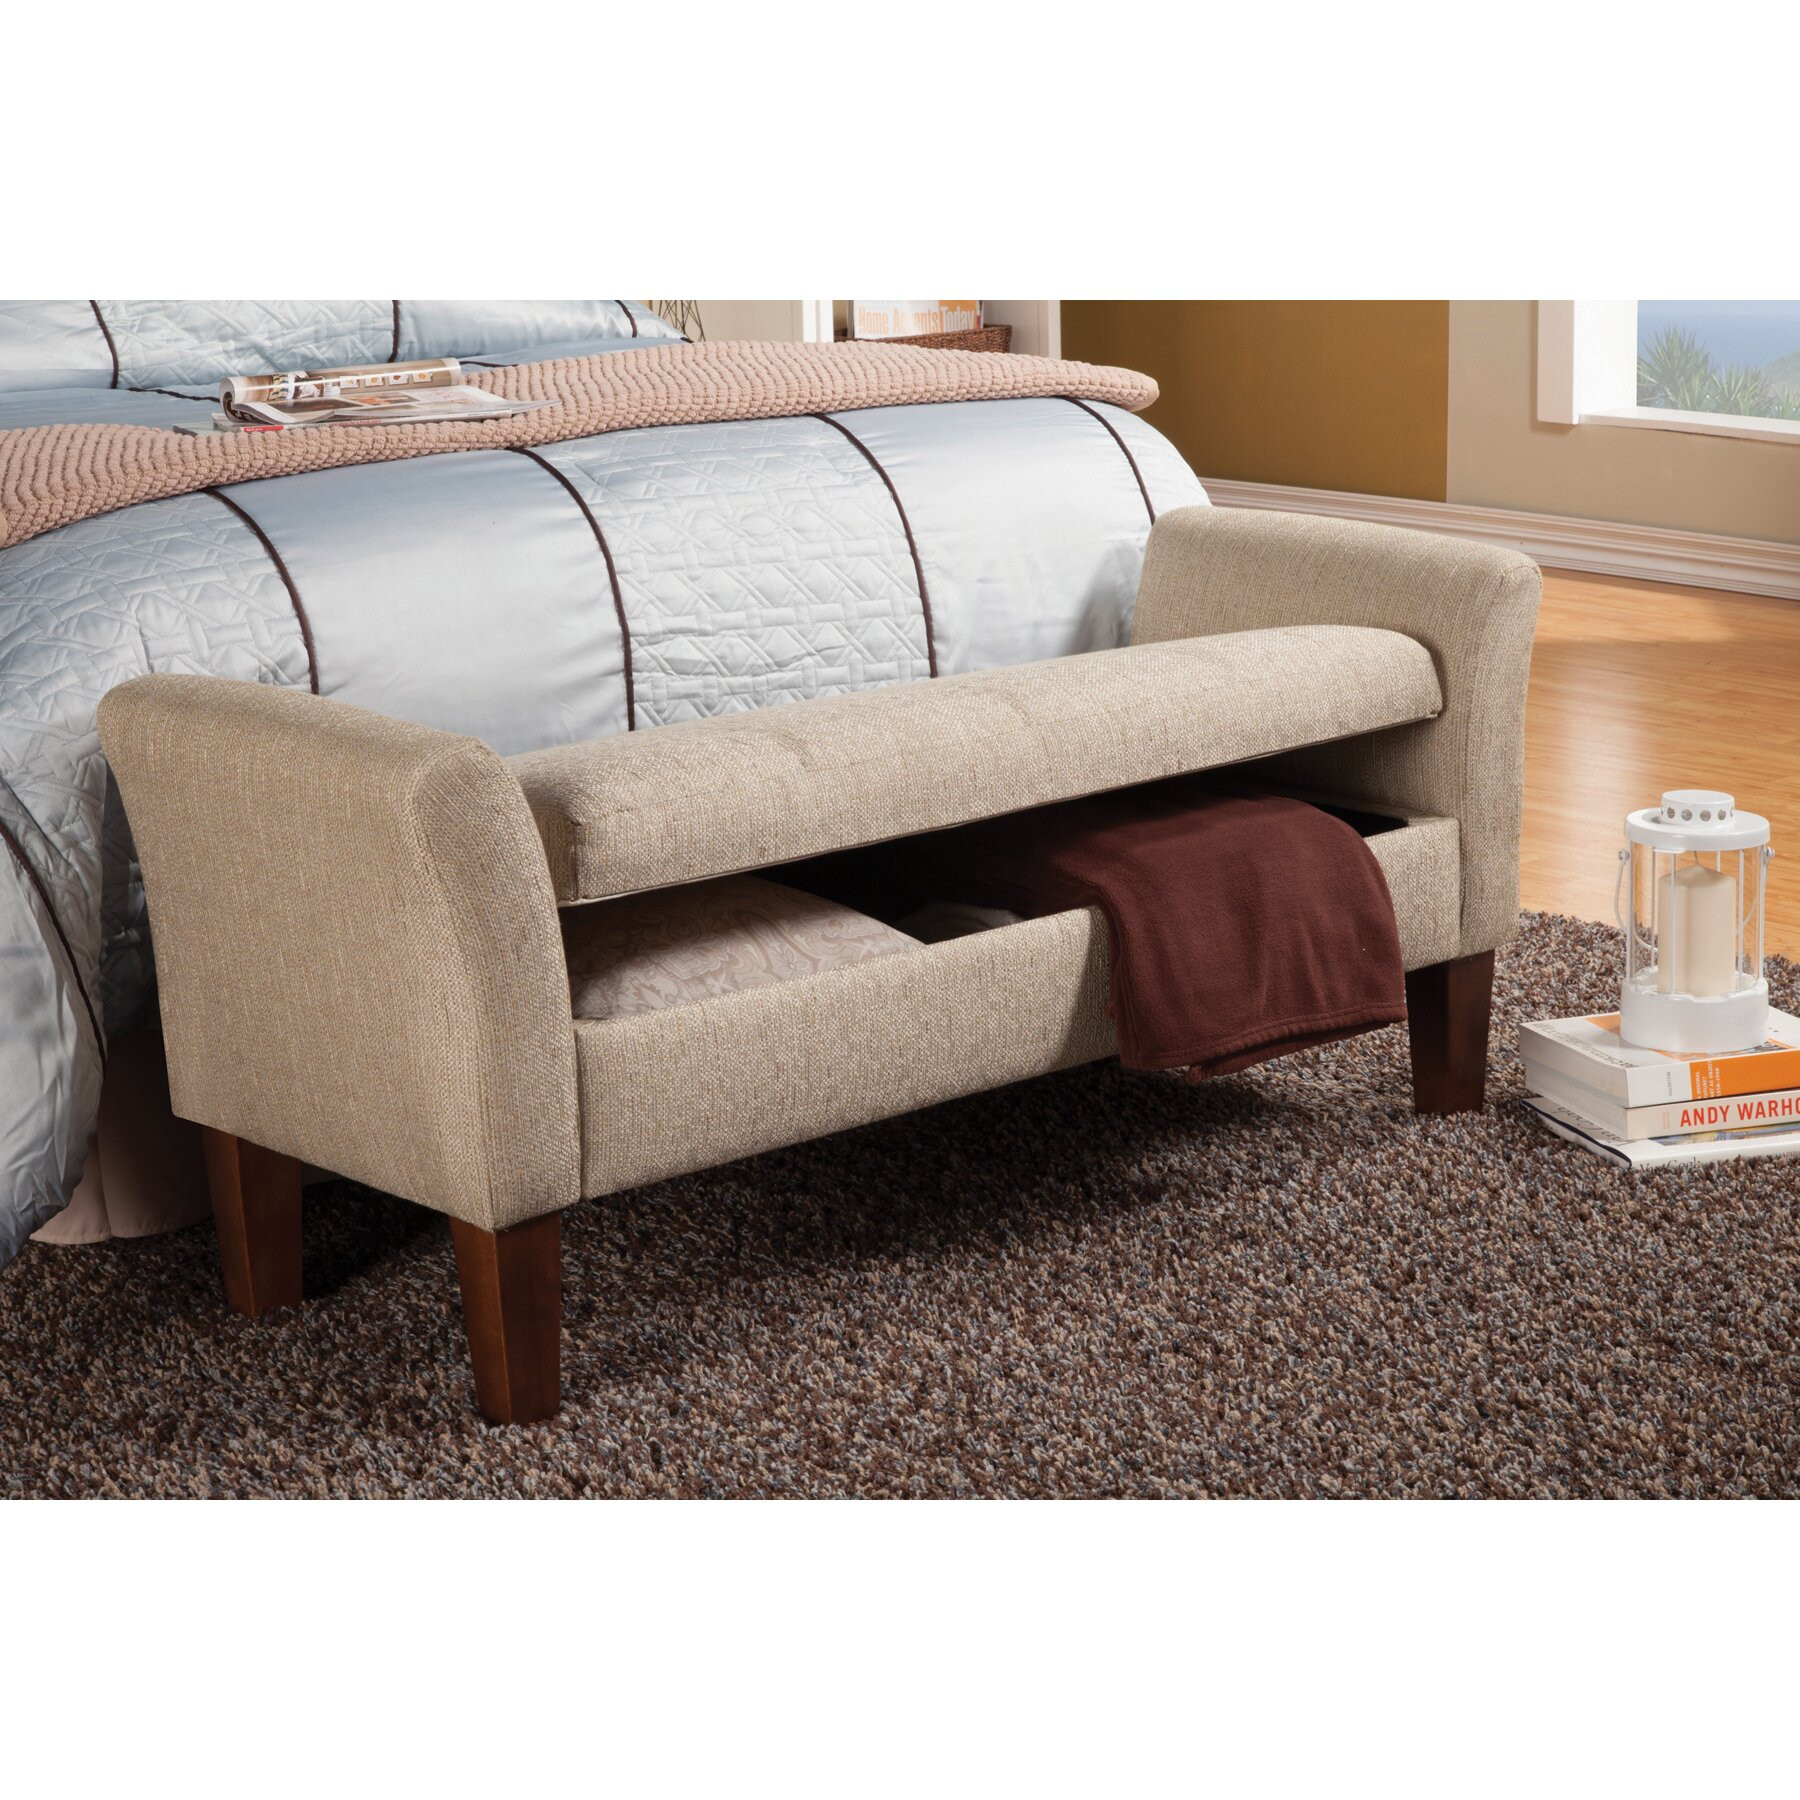 Storage Benches For Bedroom
 Wildon Home Upholstered Storage Bedroom Bench & Reviews